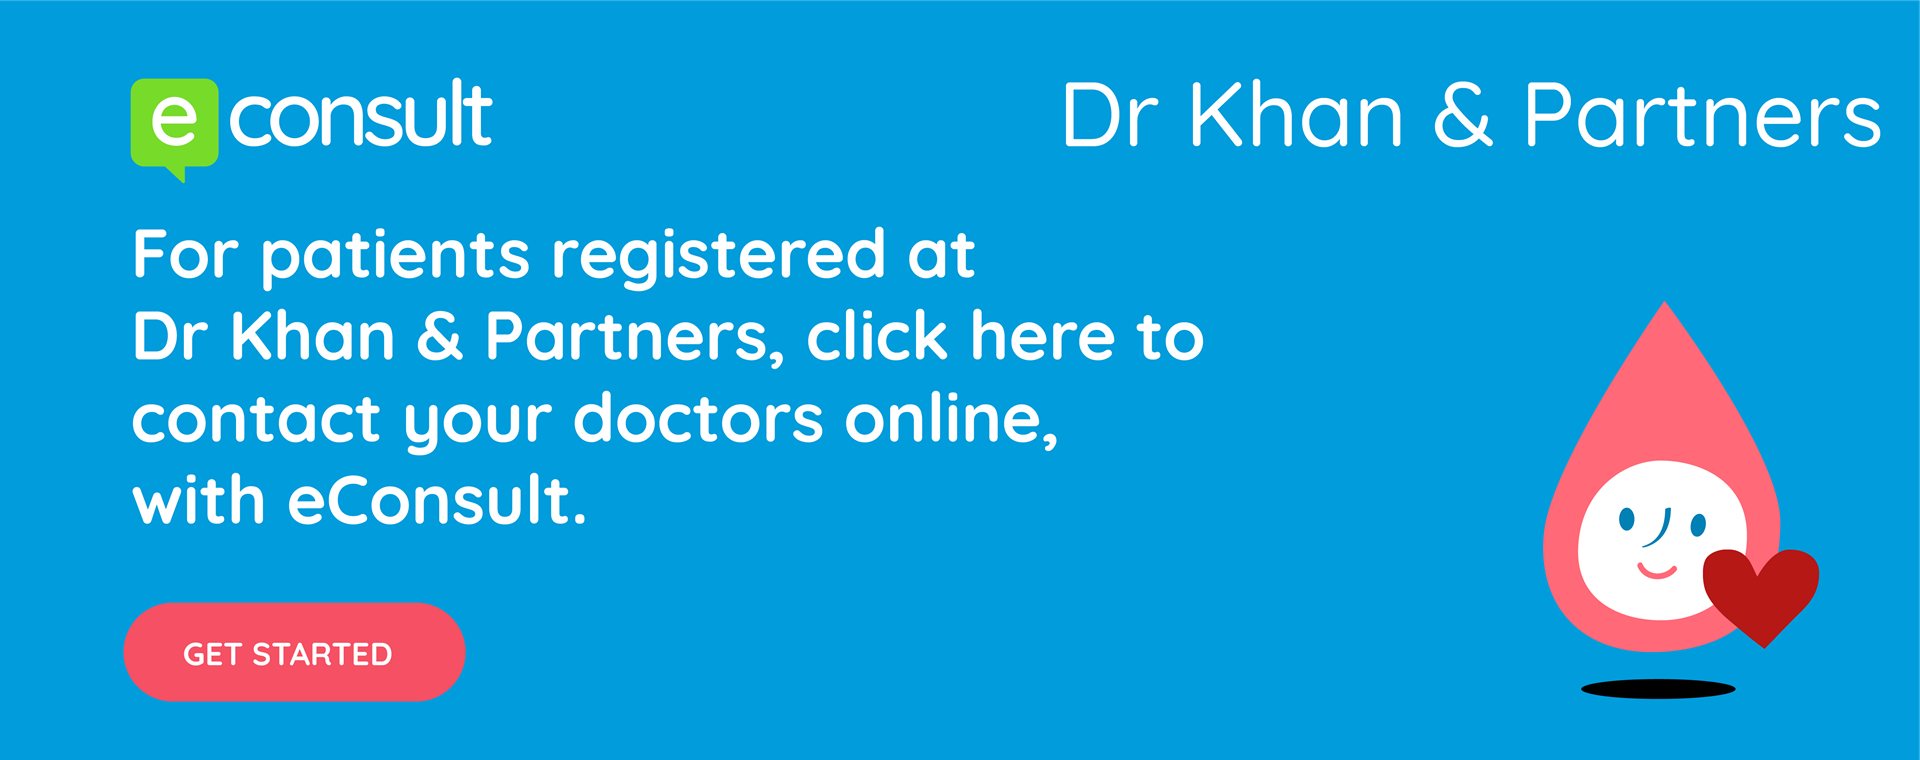 eConsult - Dr Khan and Partners